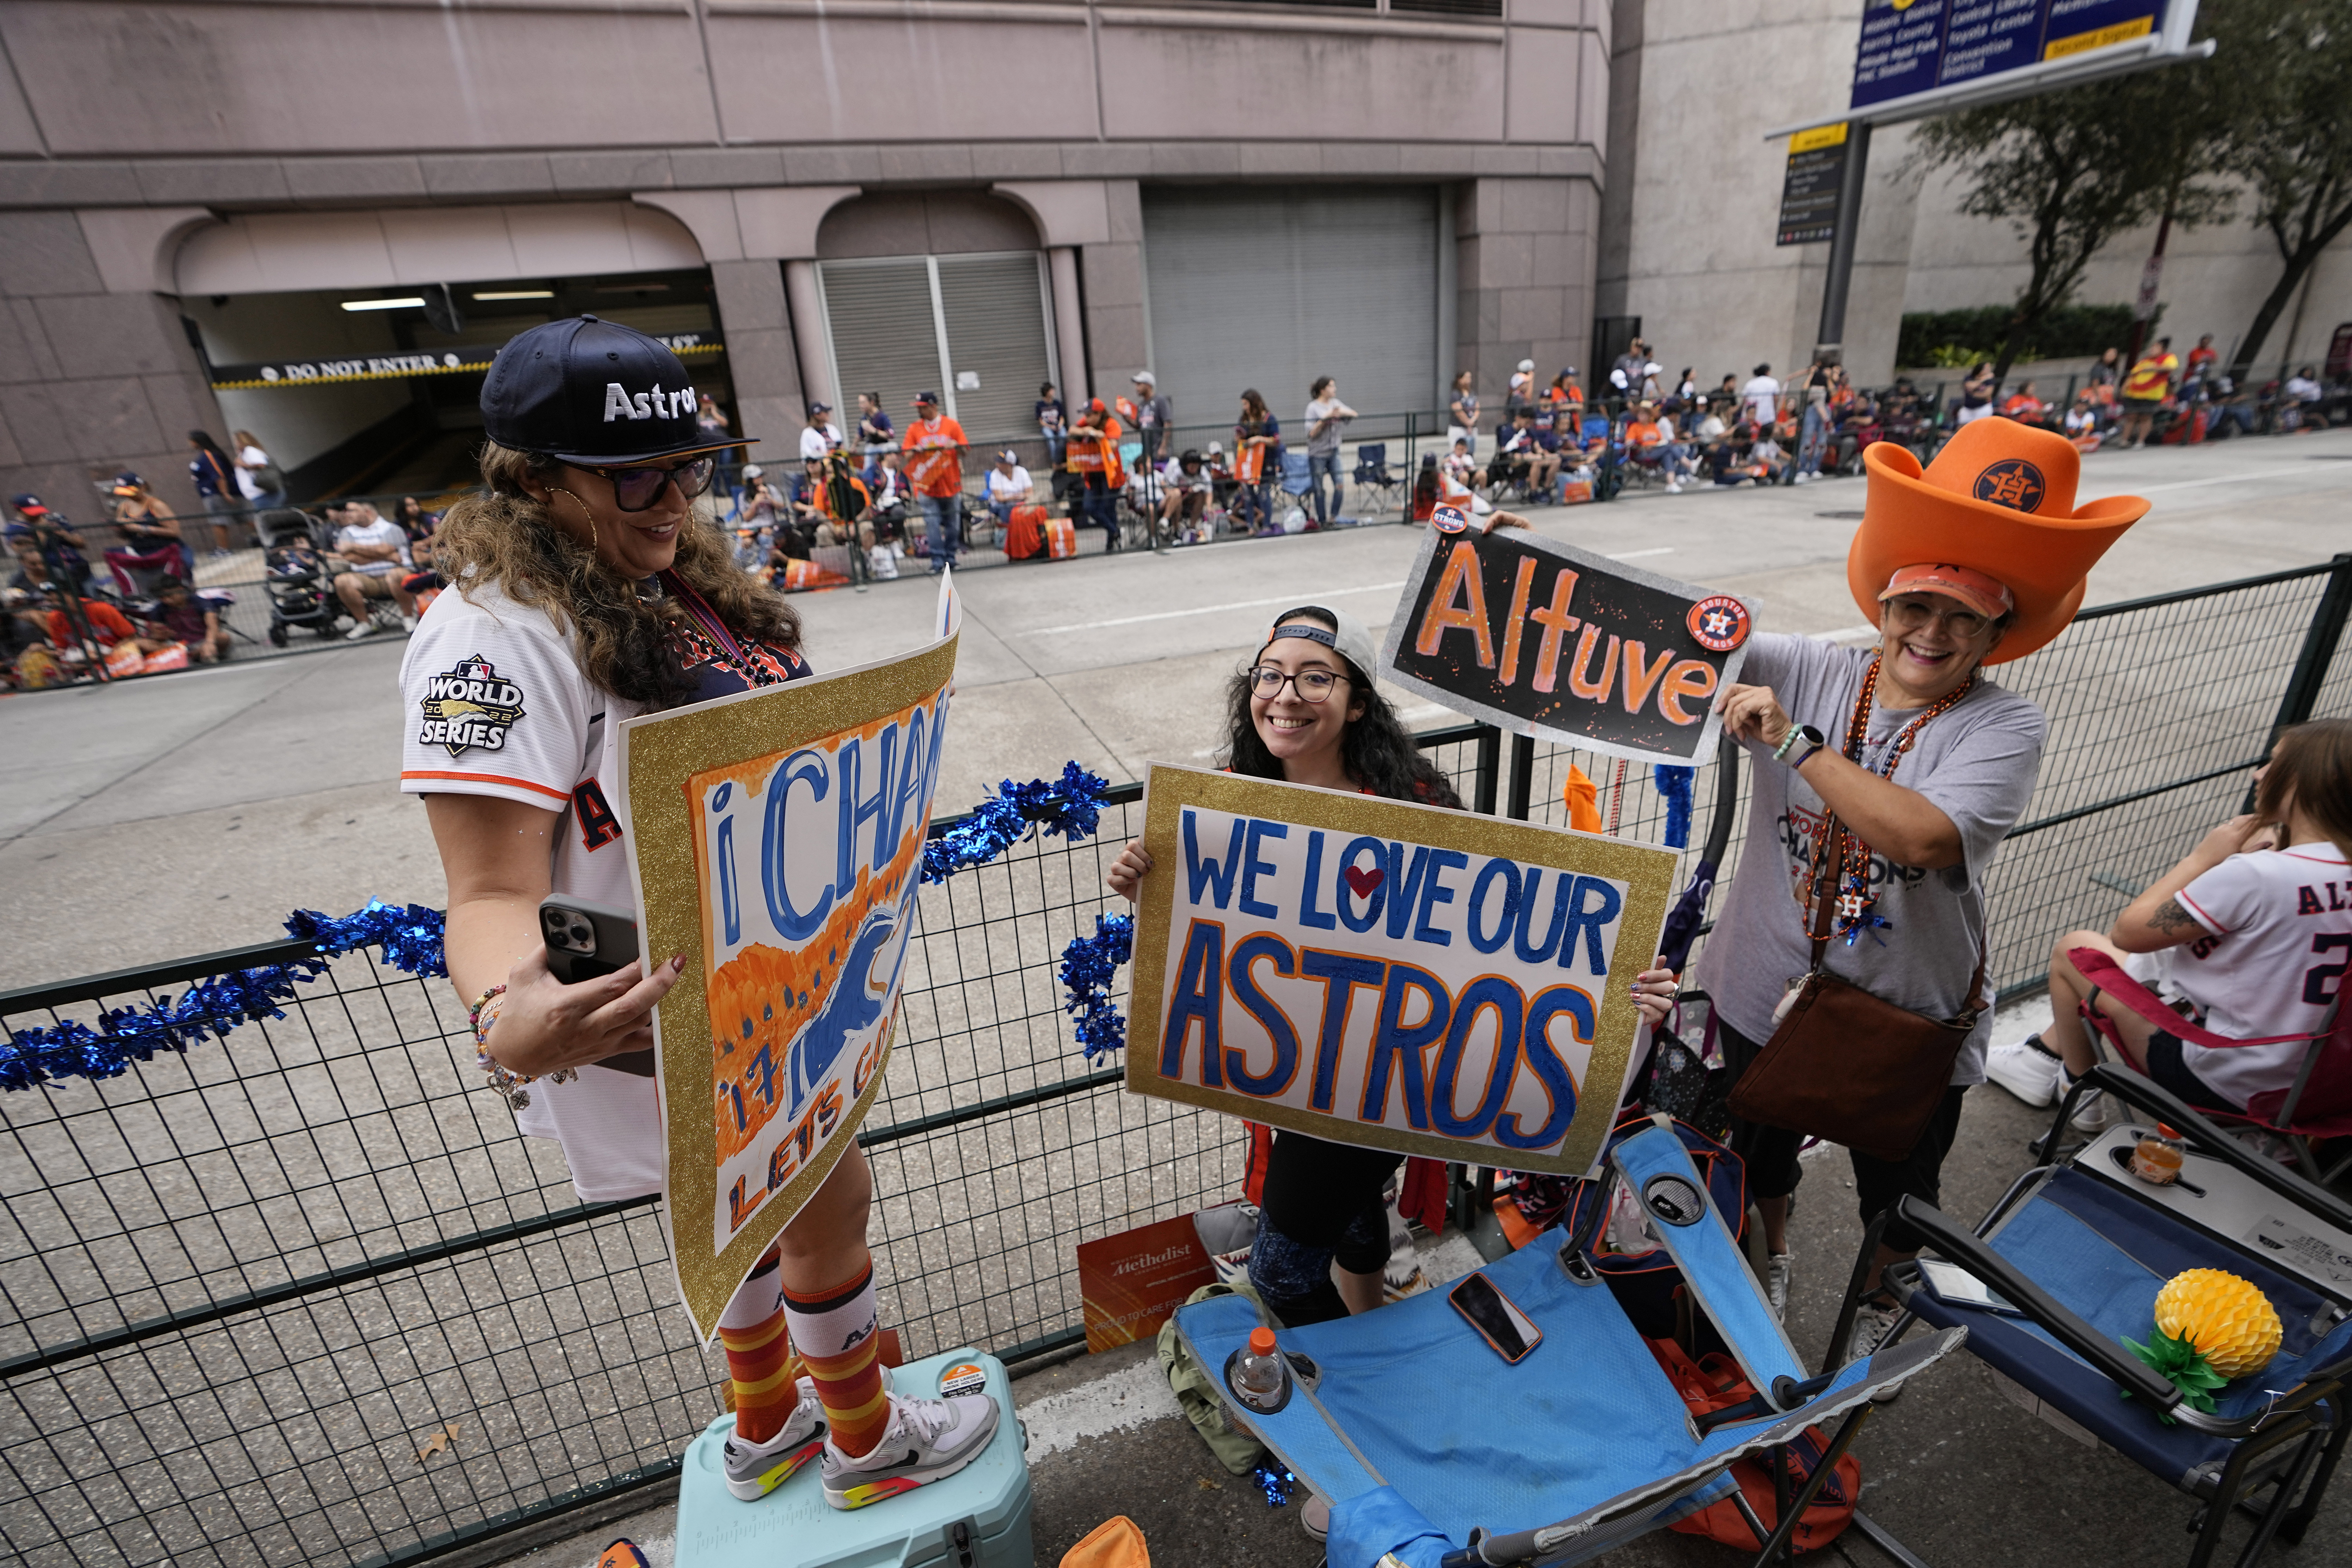 How to watch the Astros World Series victory parade